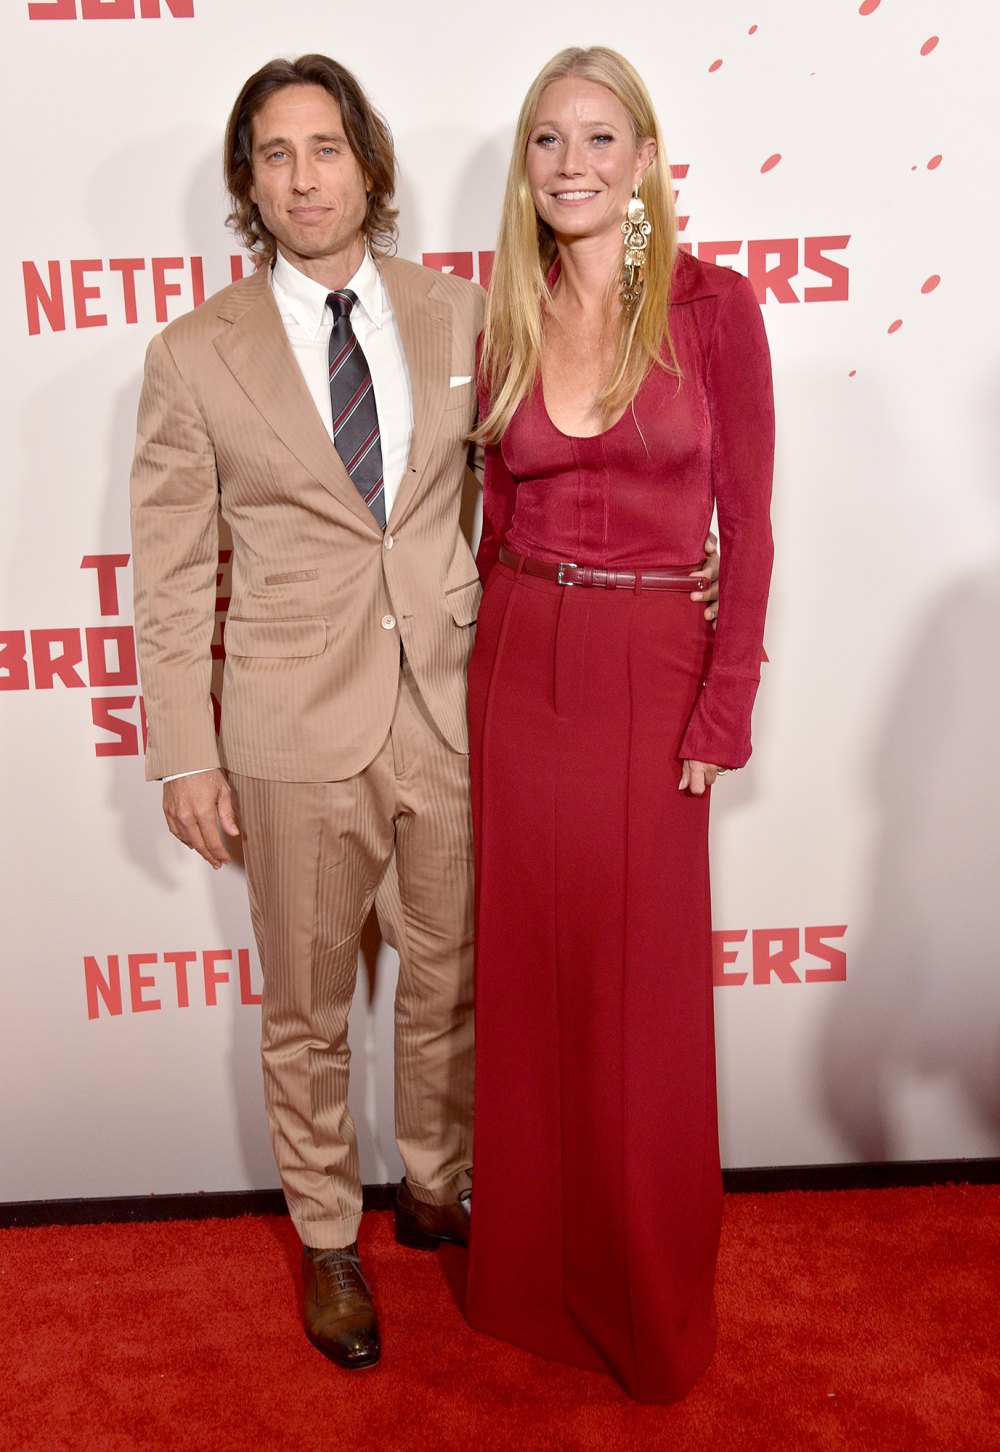 Gwyneth Paltrow attends the Los Angeles Premiere Of Netflix's "The Brothers Sun"